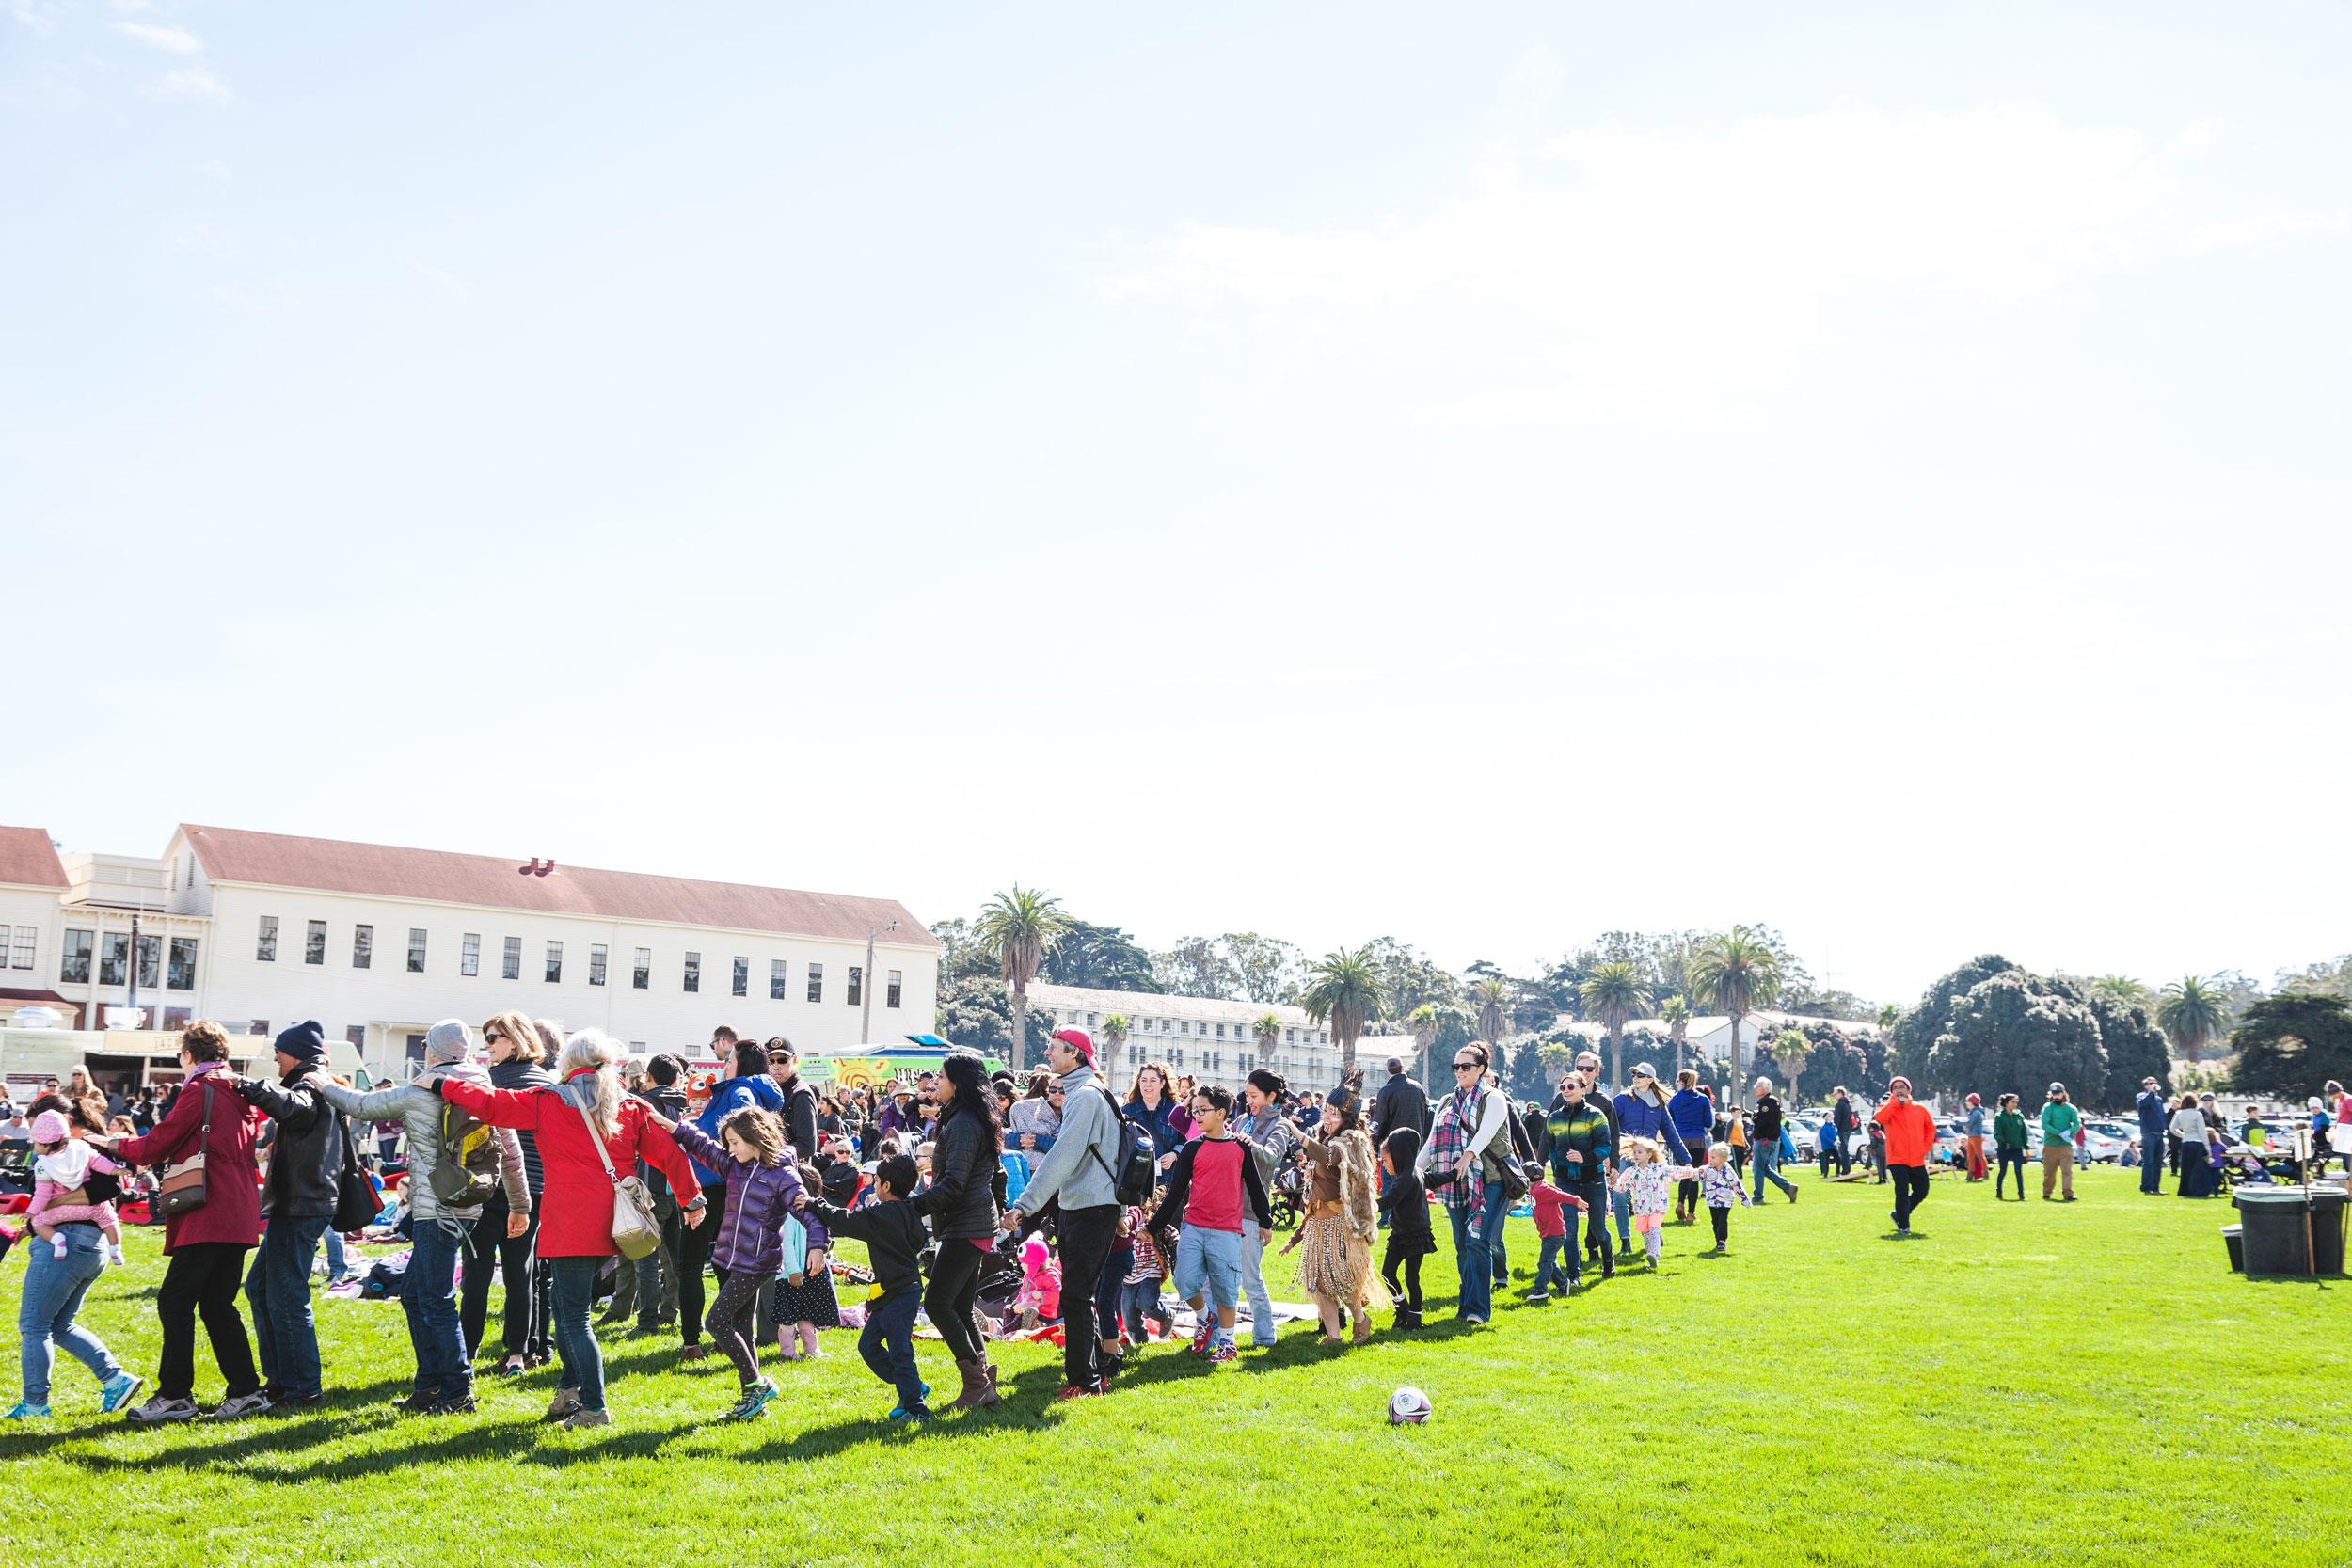 Presidio Picnic groups lined up on lawn